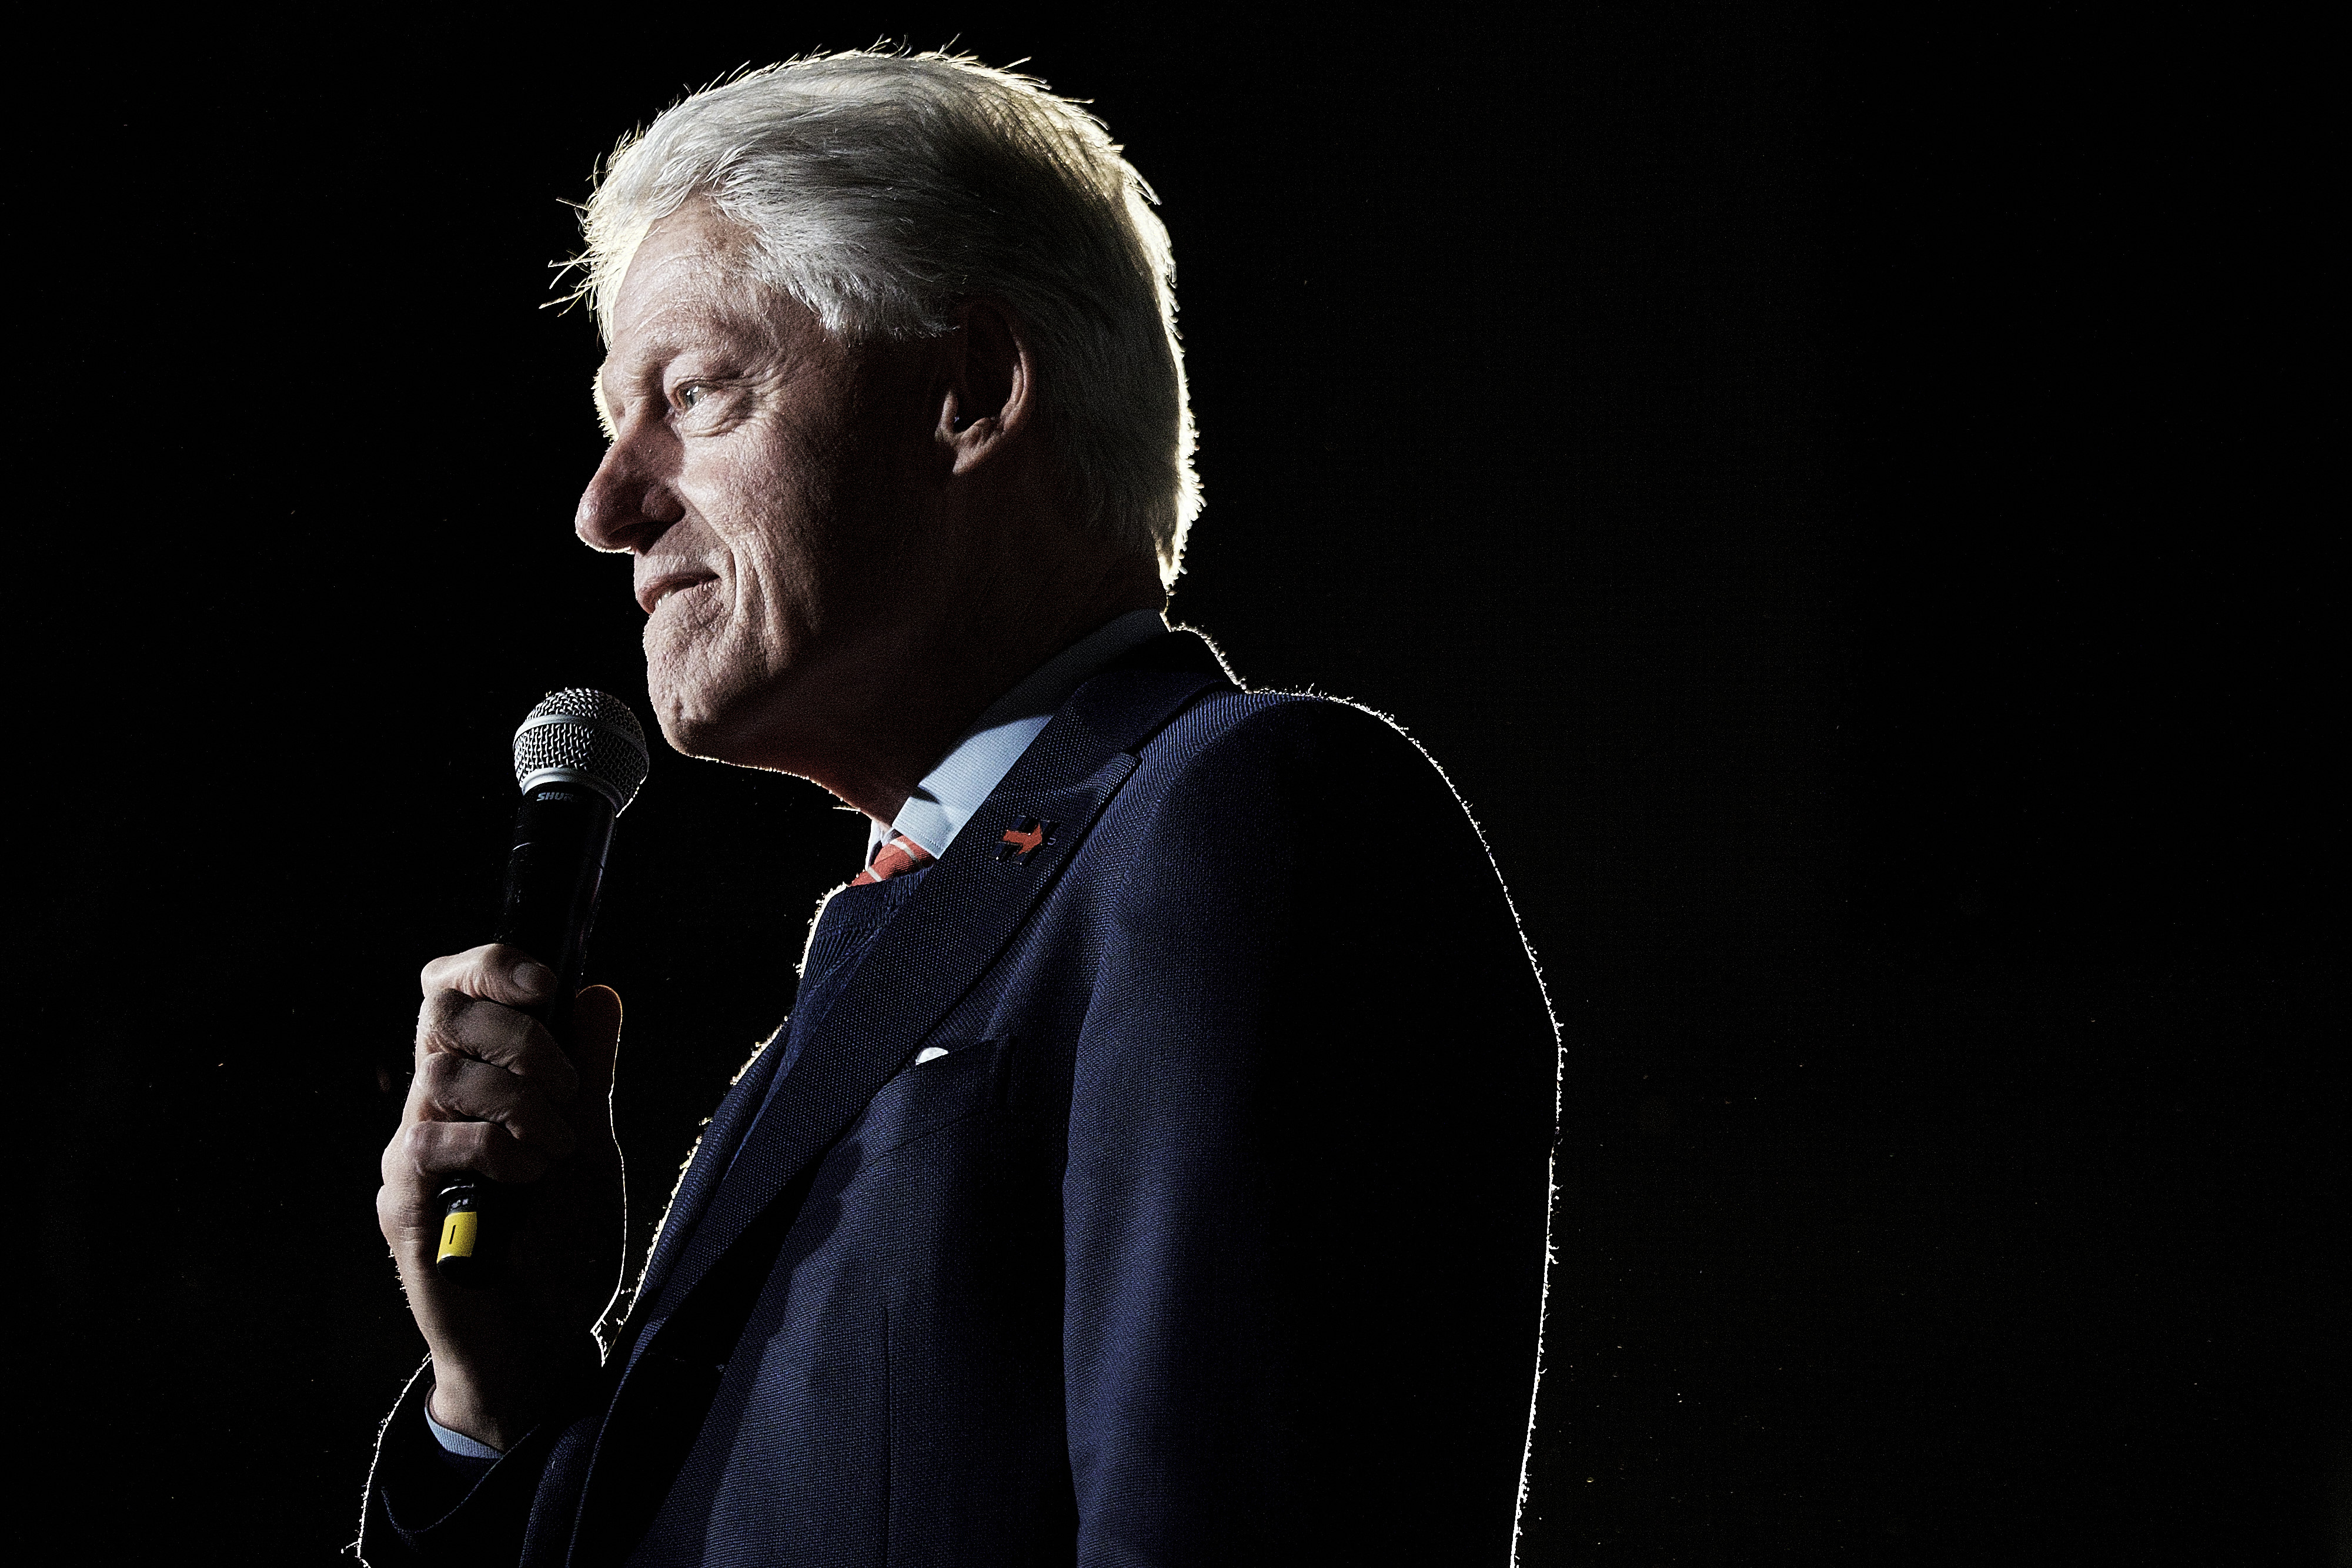 Bill Clinton, former U.S. President and husband of former U.S. Secretary of State and 2016 Democratic presidential candidate Hillary Clinton, speaks to the crowd, during a town hall event at the Columbia Museum of Art Boyd Plaza in Columbia, S.C., on Feb. 26, 2017.